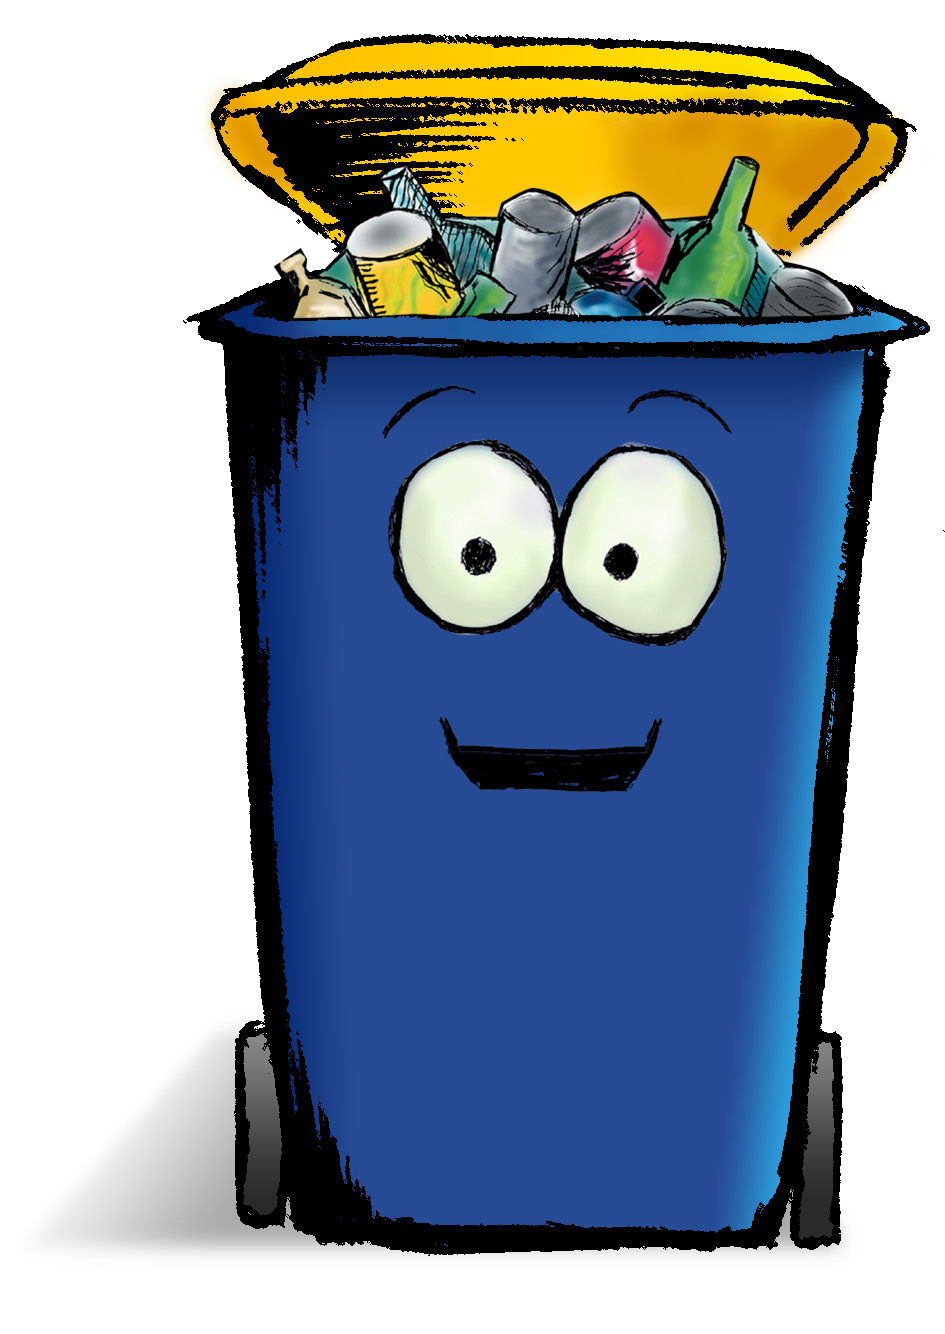 Pix For > Cartoon Recycle Trash Can - Cliparts.co